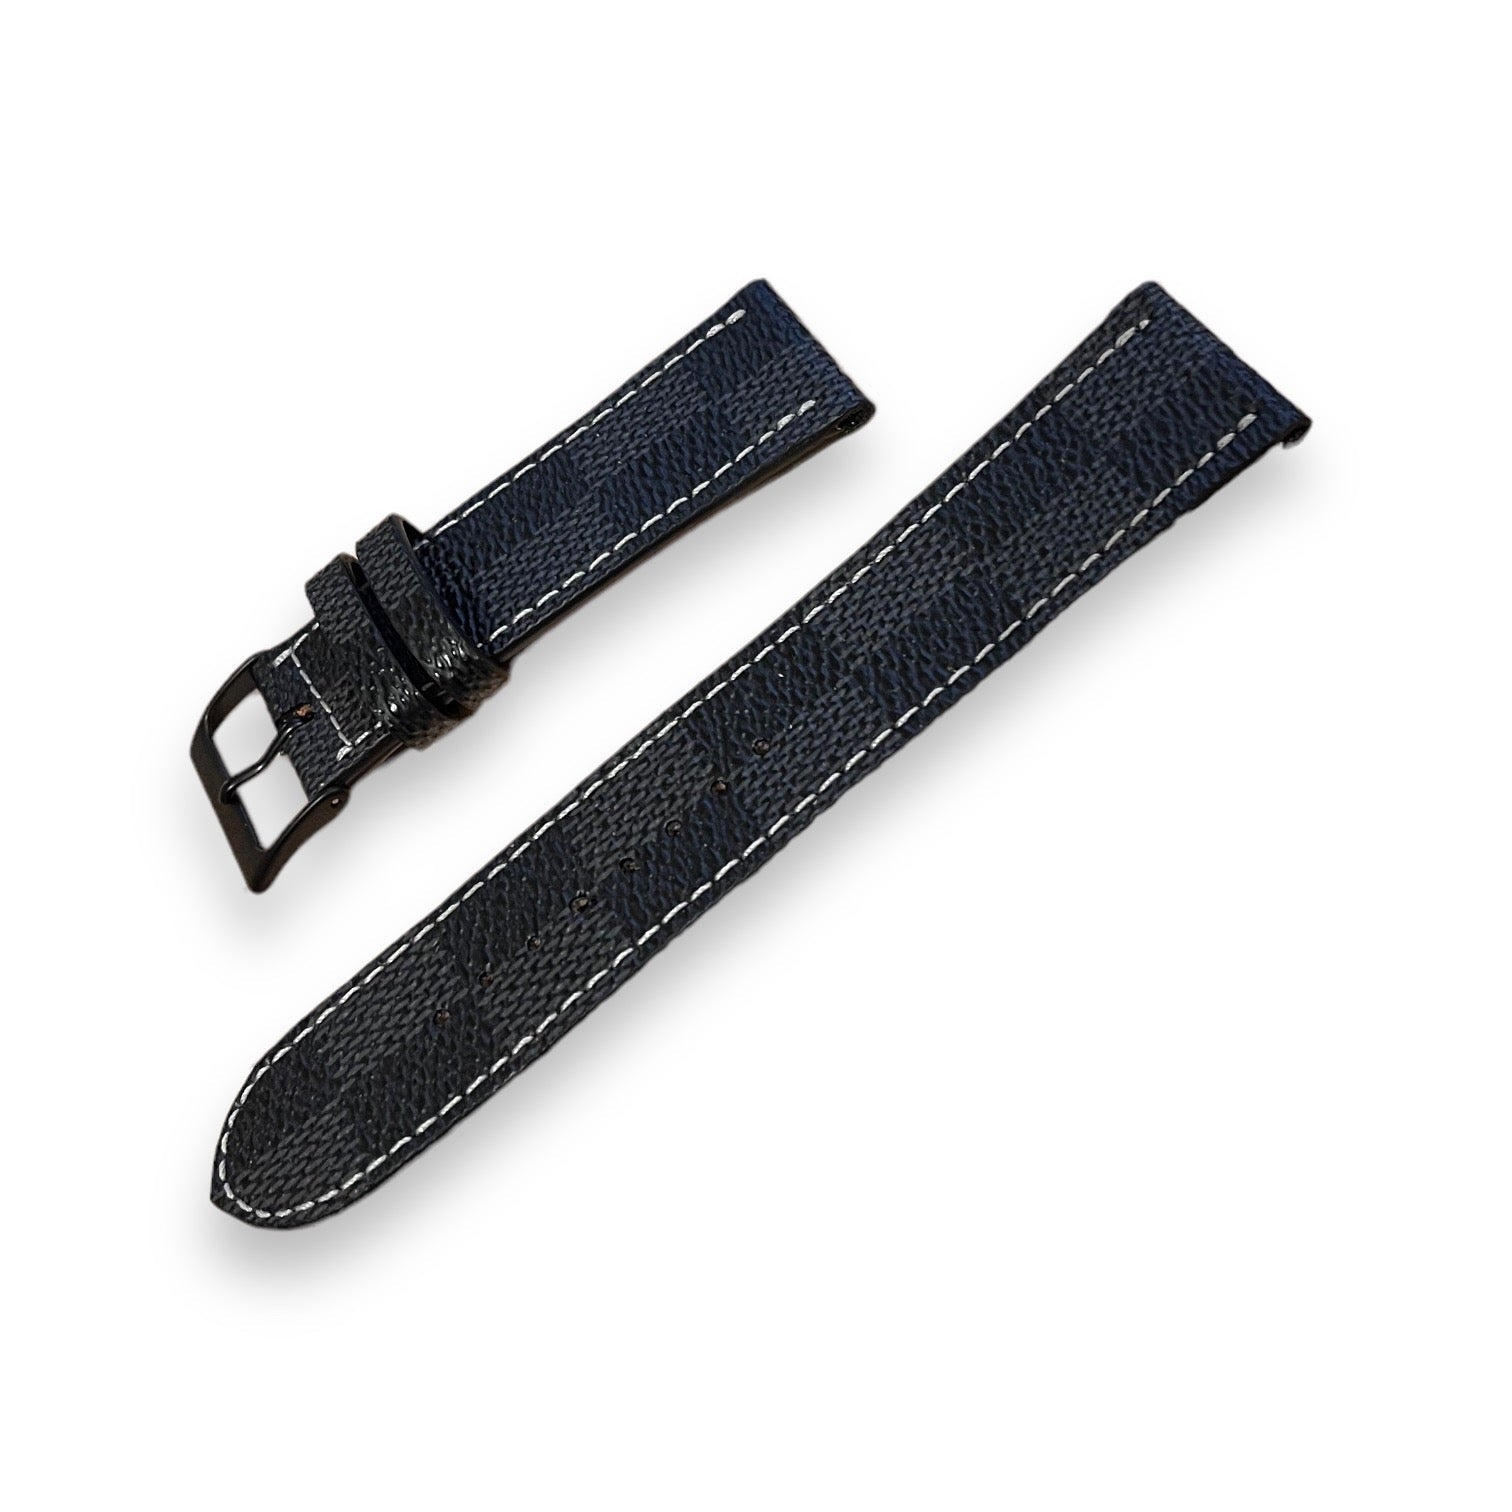 Made-to-Order: Upcycled Graphite Watch Band